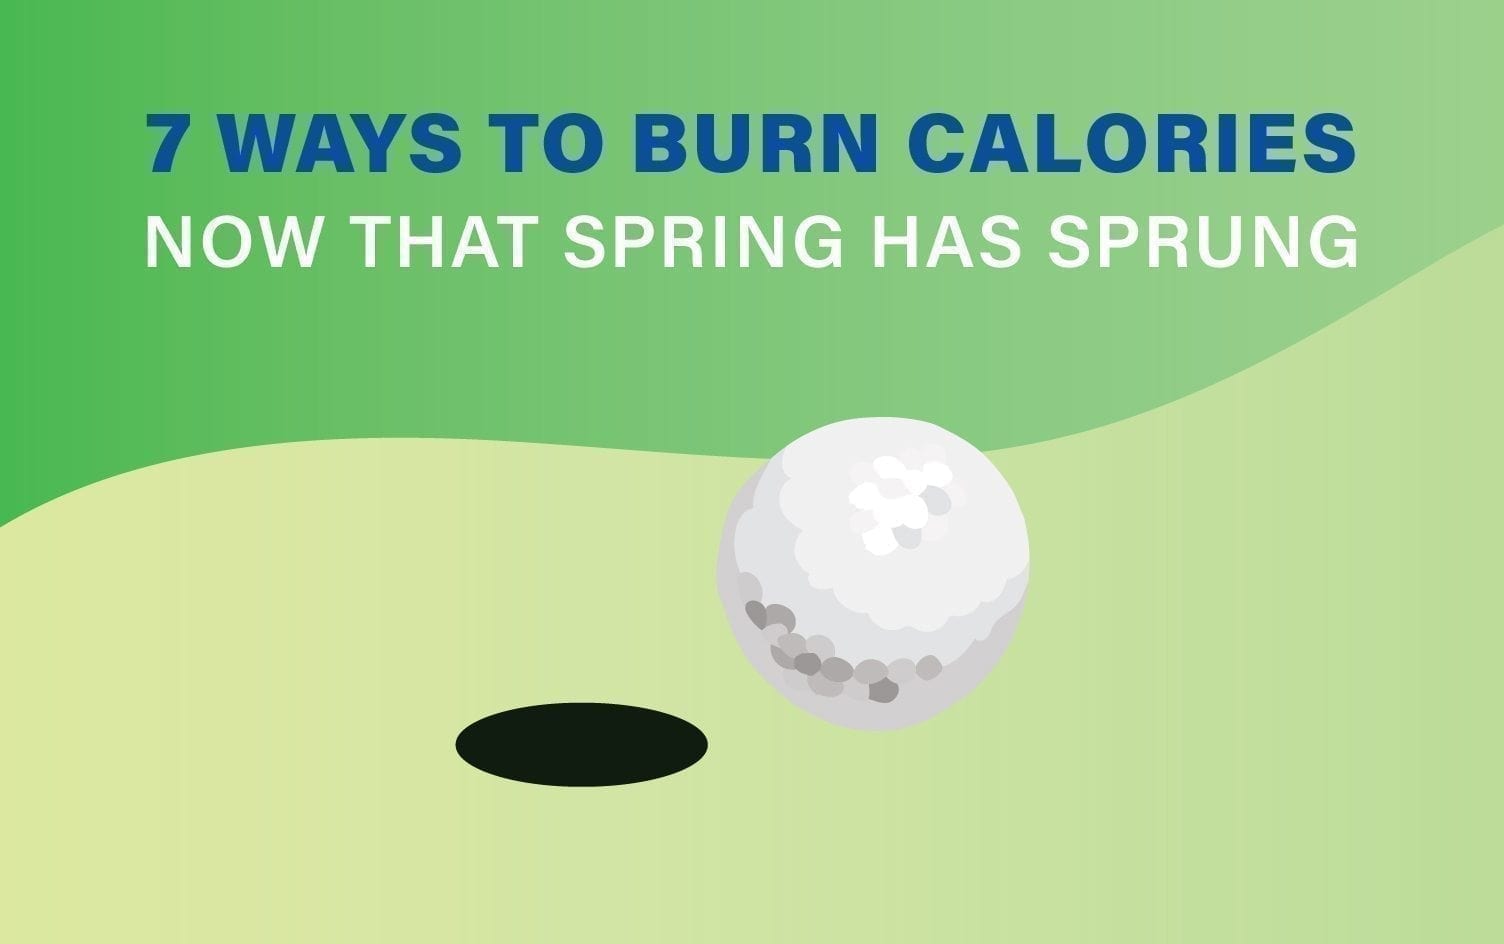 7 Ways to Burn Calories Now That Spring Has Sprung | Weight Loss |  MyFitnessPal